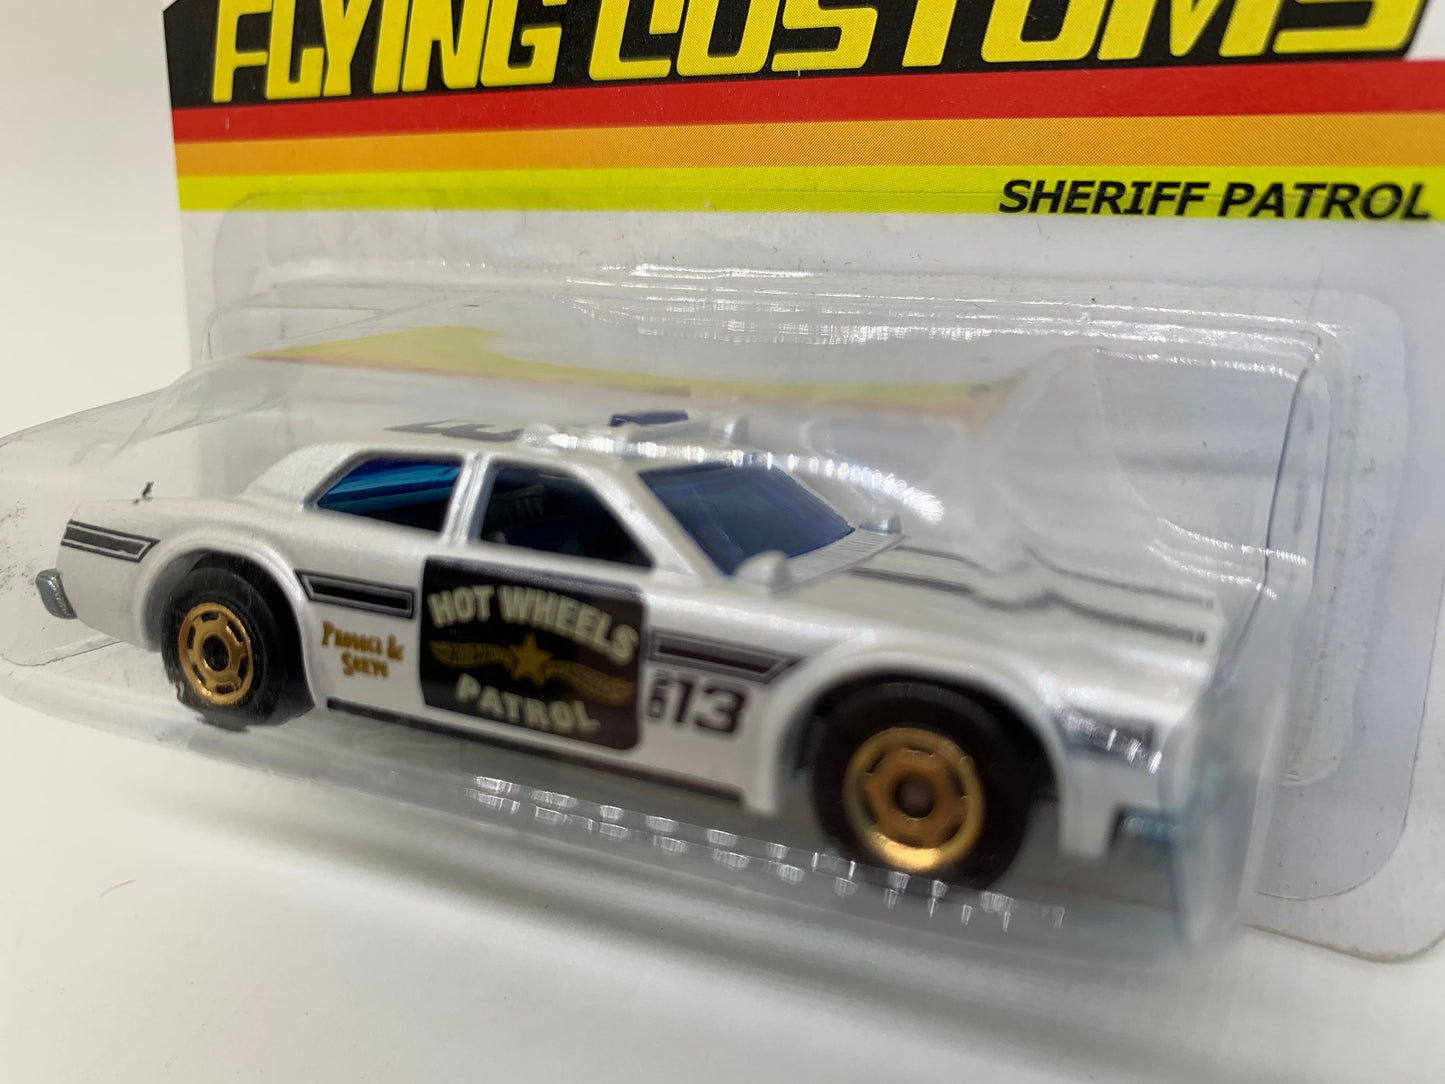 Hot Wheels Sheriff Patrol Dodge Monaco White Flying Customs Perfect Birthday Gift Miniature Collectable Model Toy Car